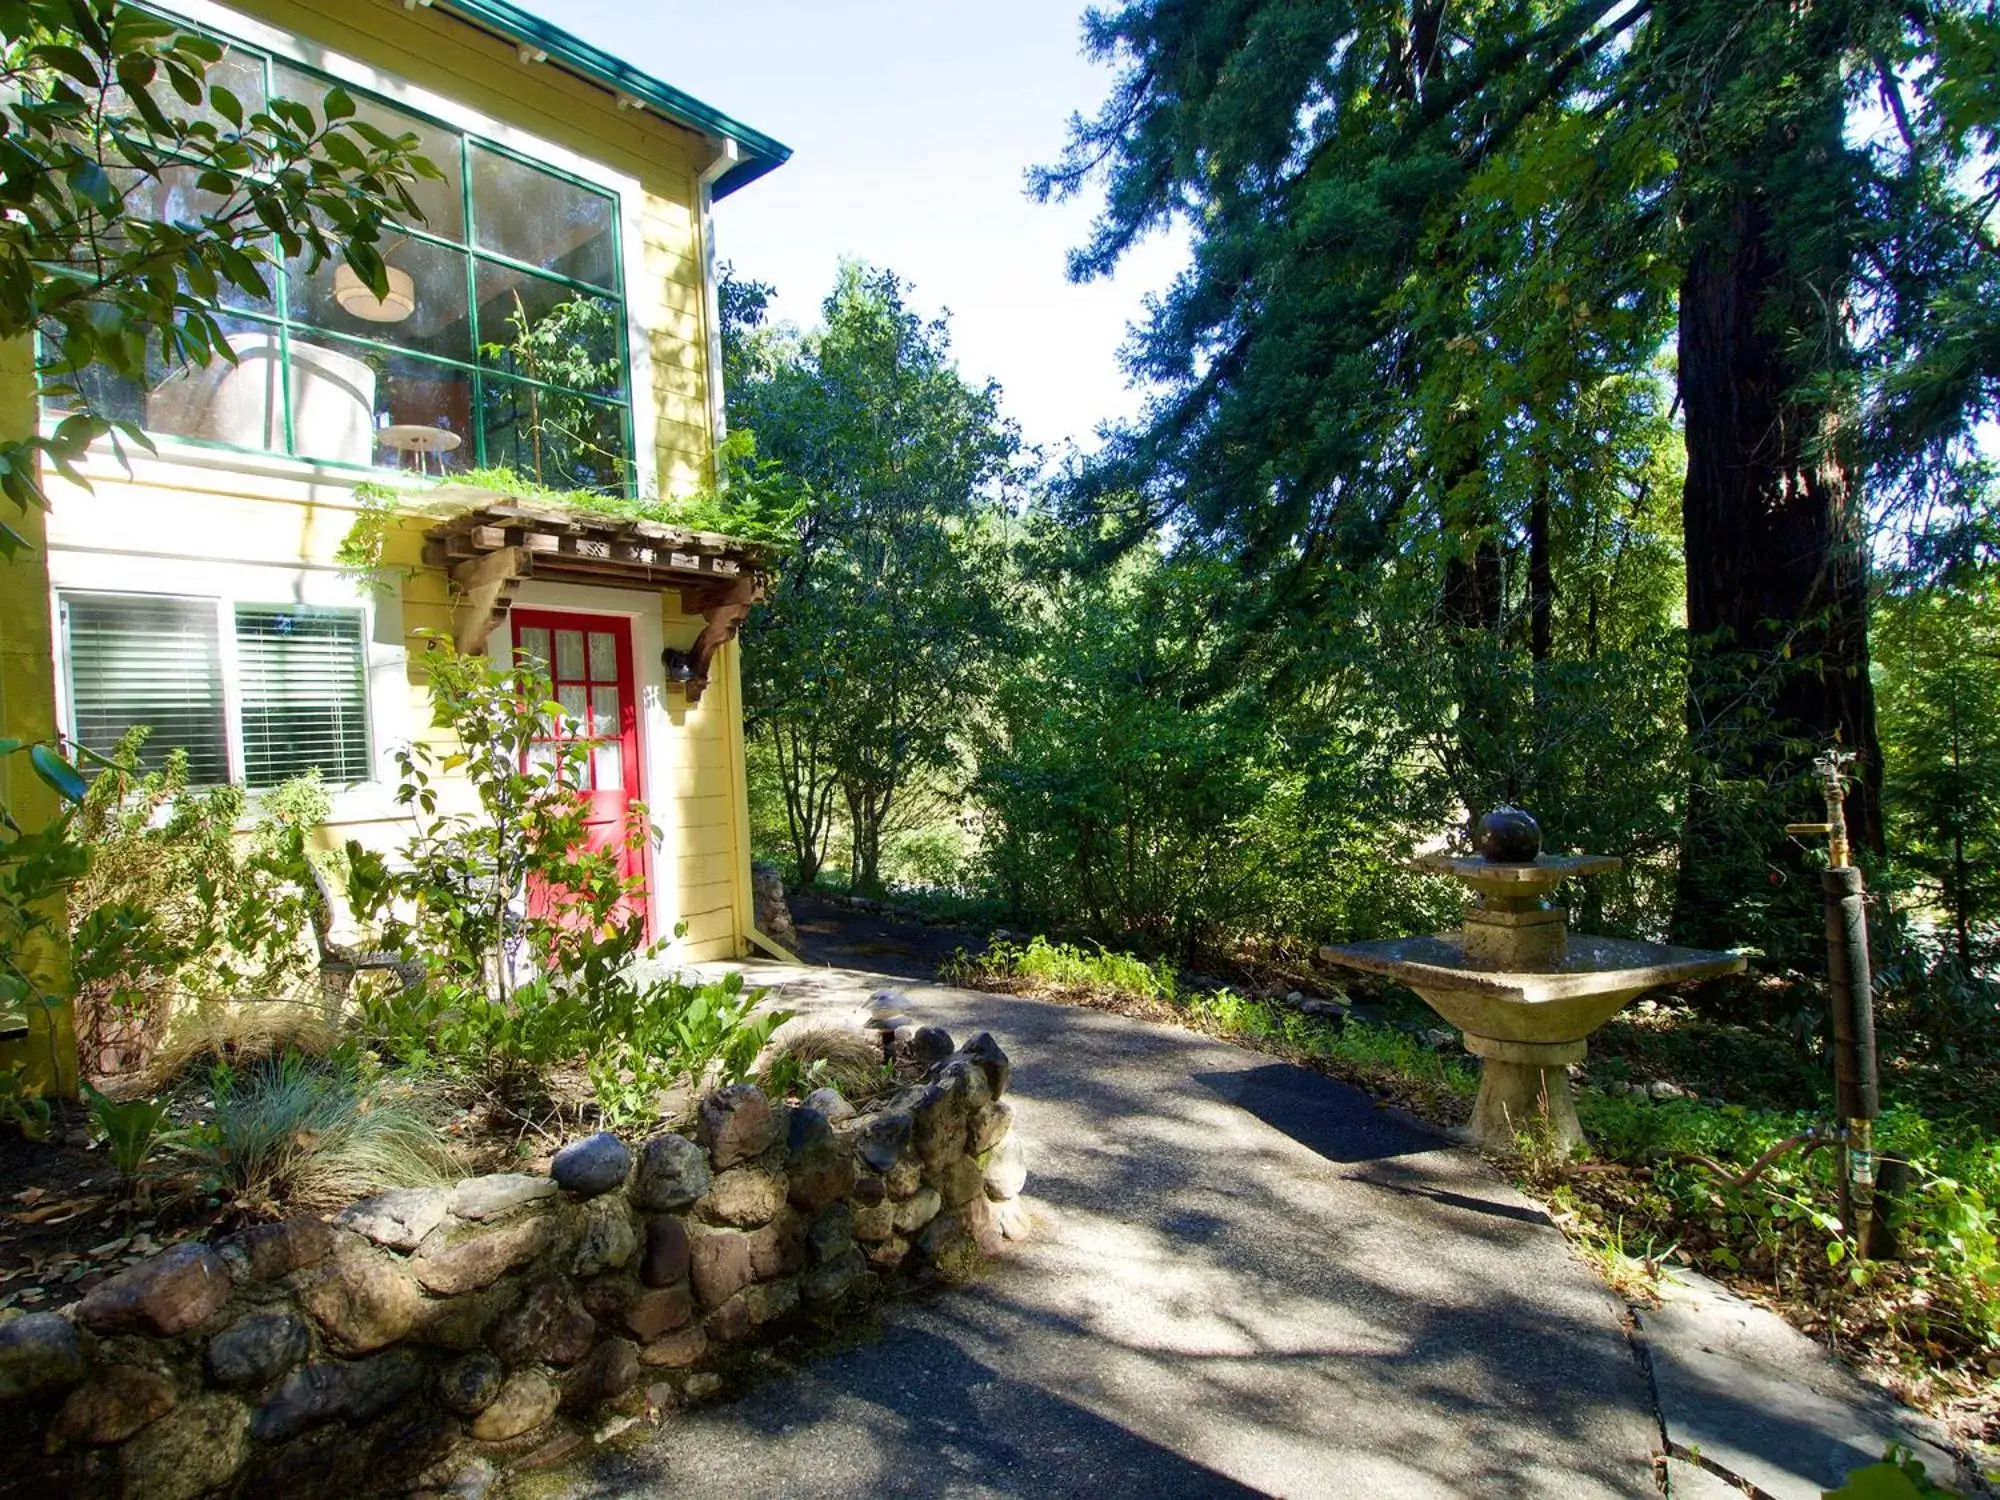 Property Building in Mine and Farm, The Inn at Guerneville, CA